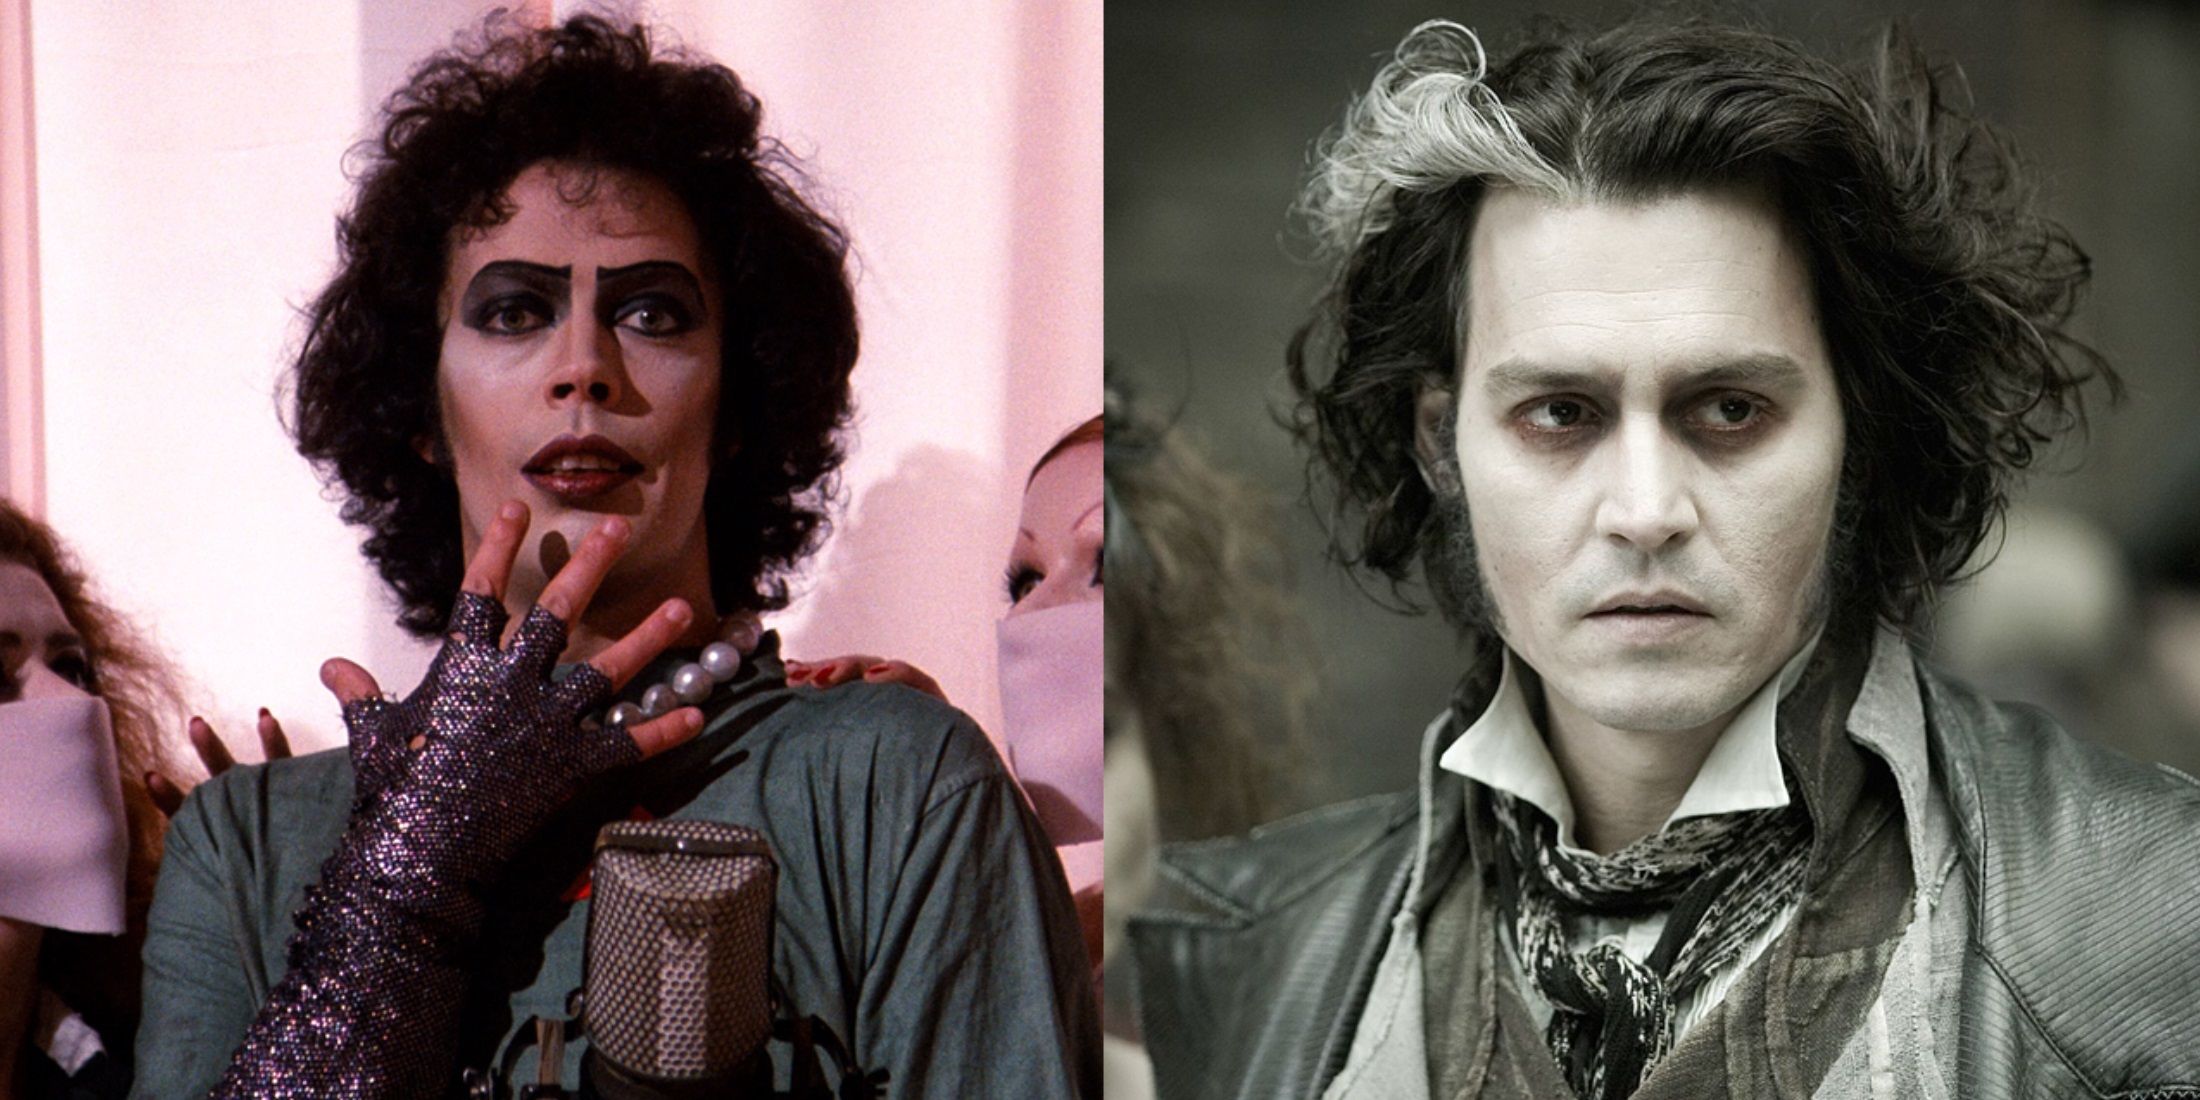 Split image of Tim Curry in The Rocky Horror Picture Show and Johnny Depp in Sweeney Todd